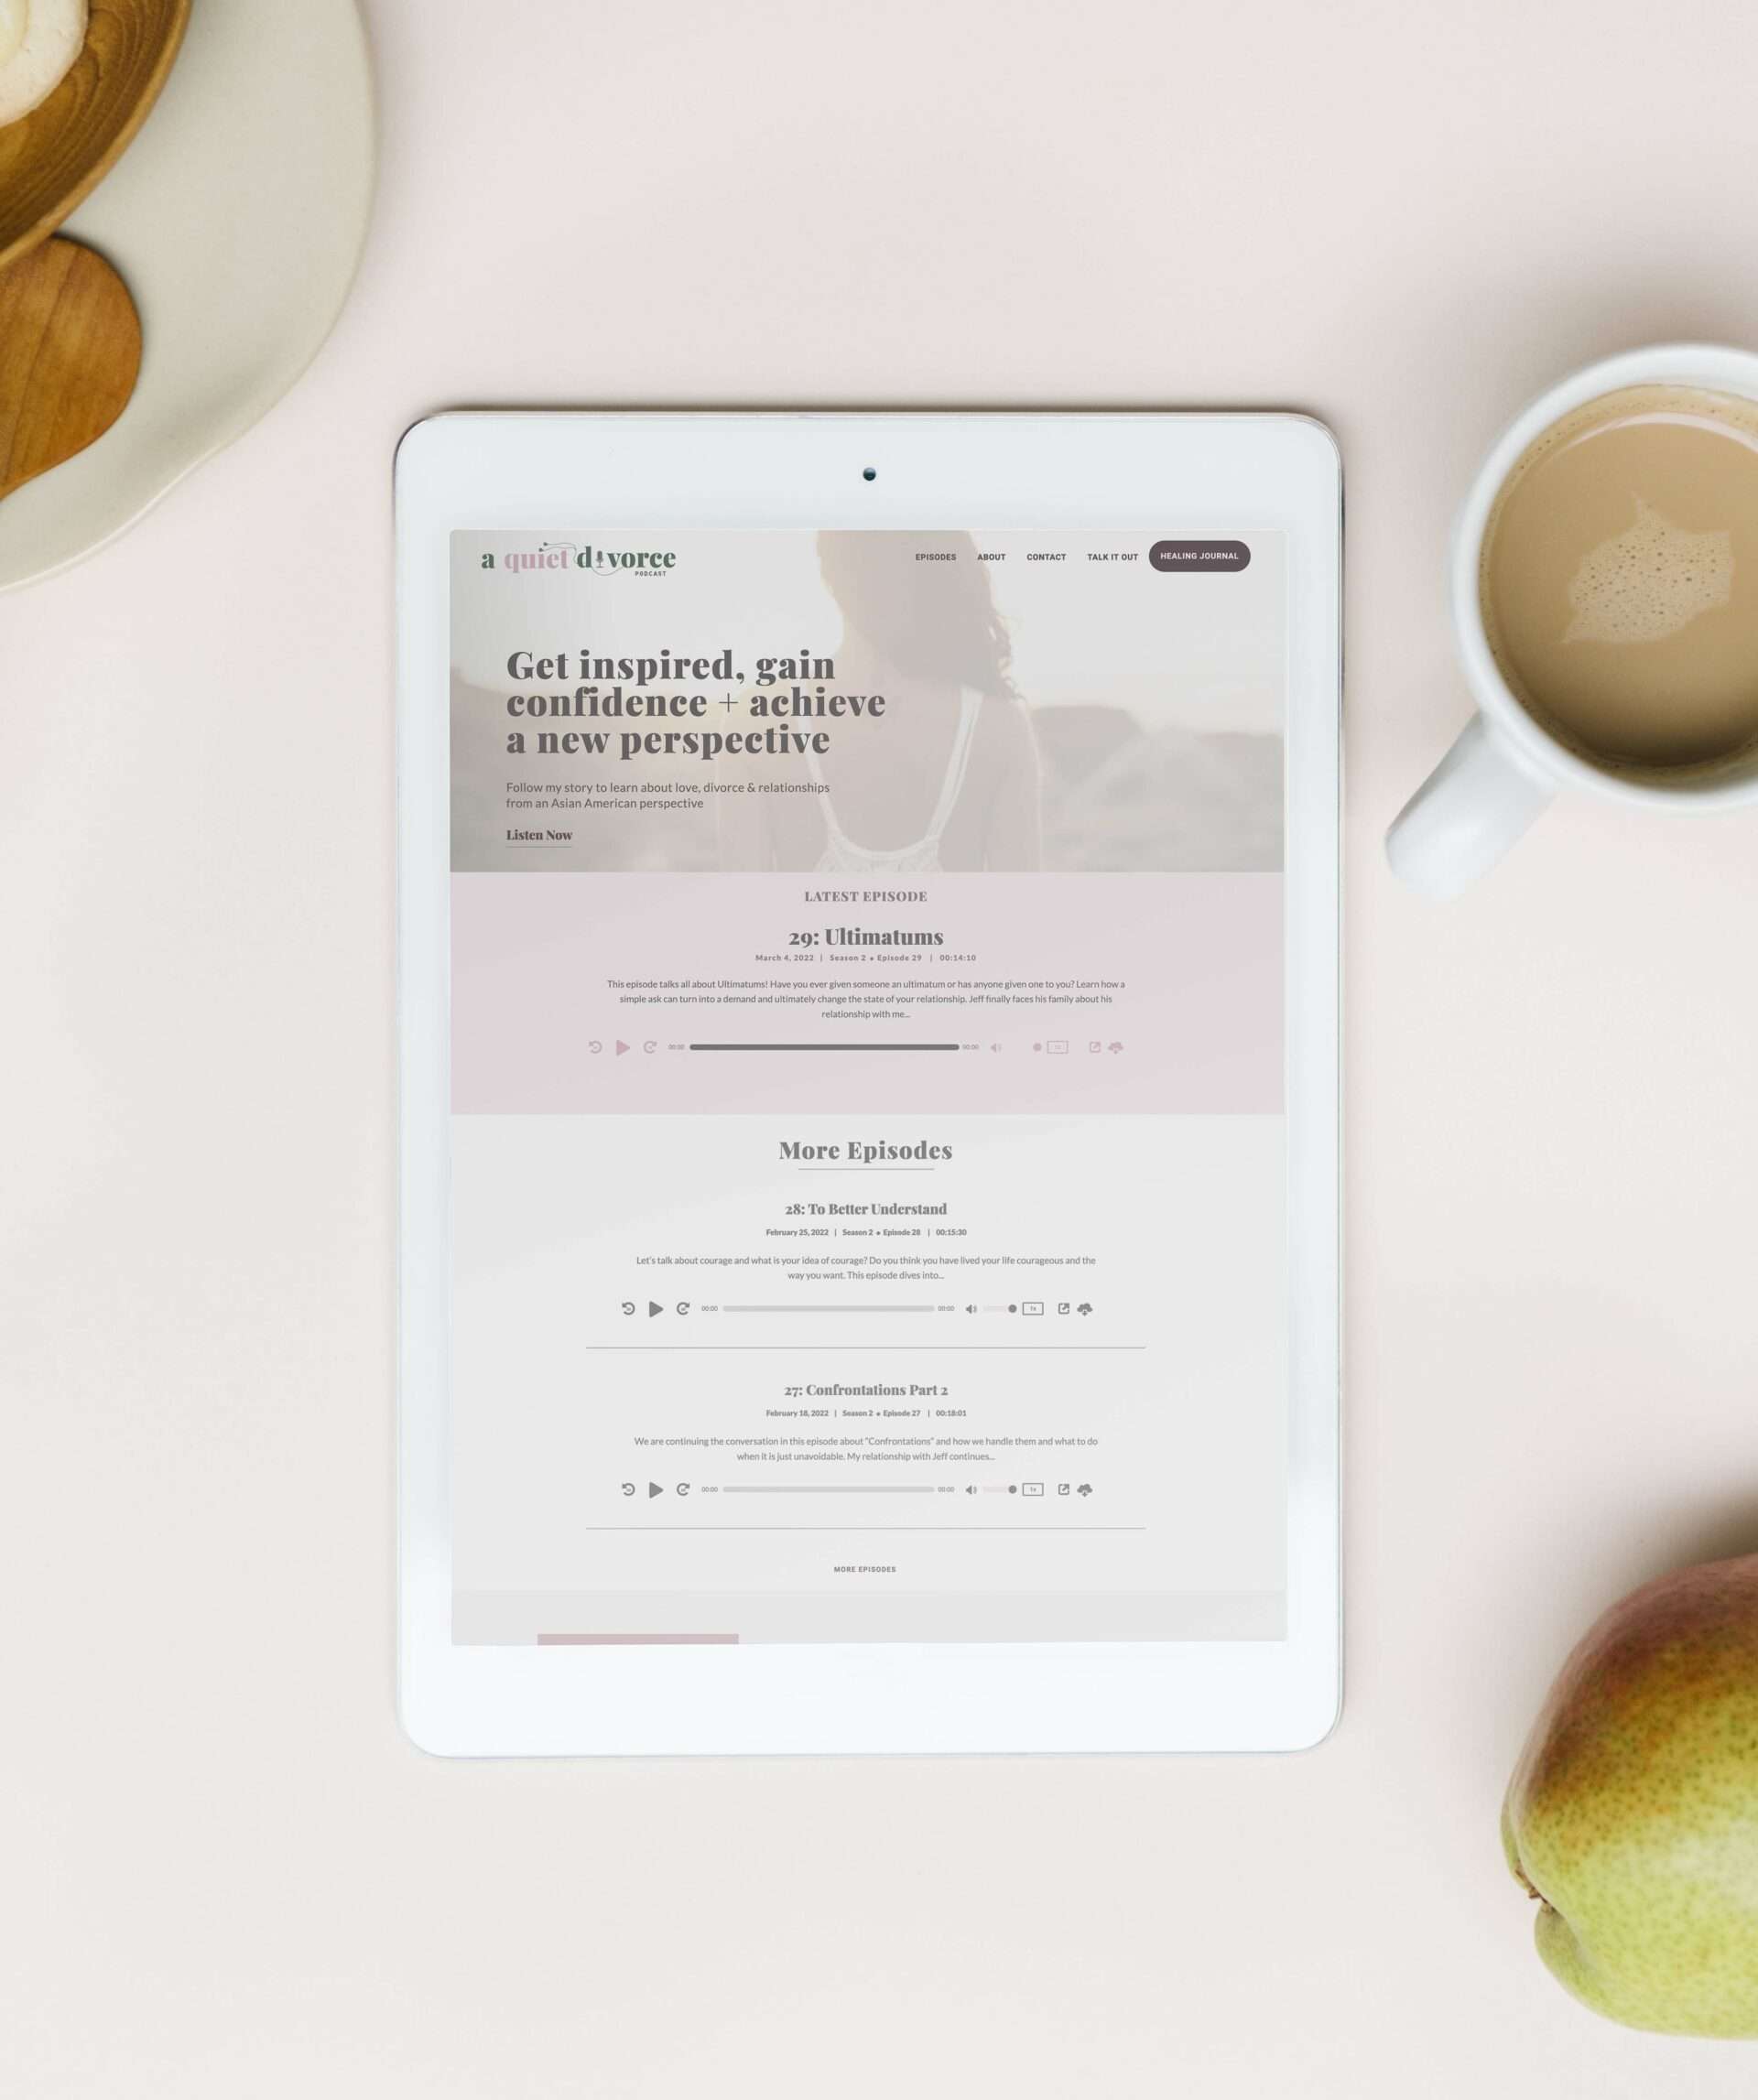 A Quiet Divorce podcast website shown on a white ipad against a pink table, a cup of coffee and some breakfast foods are nearby